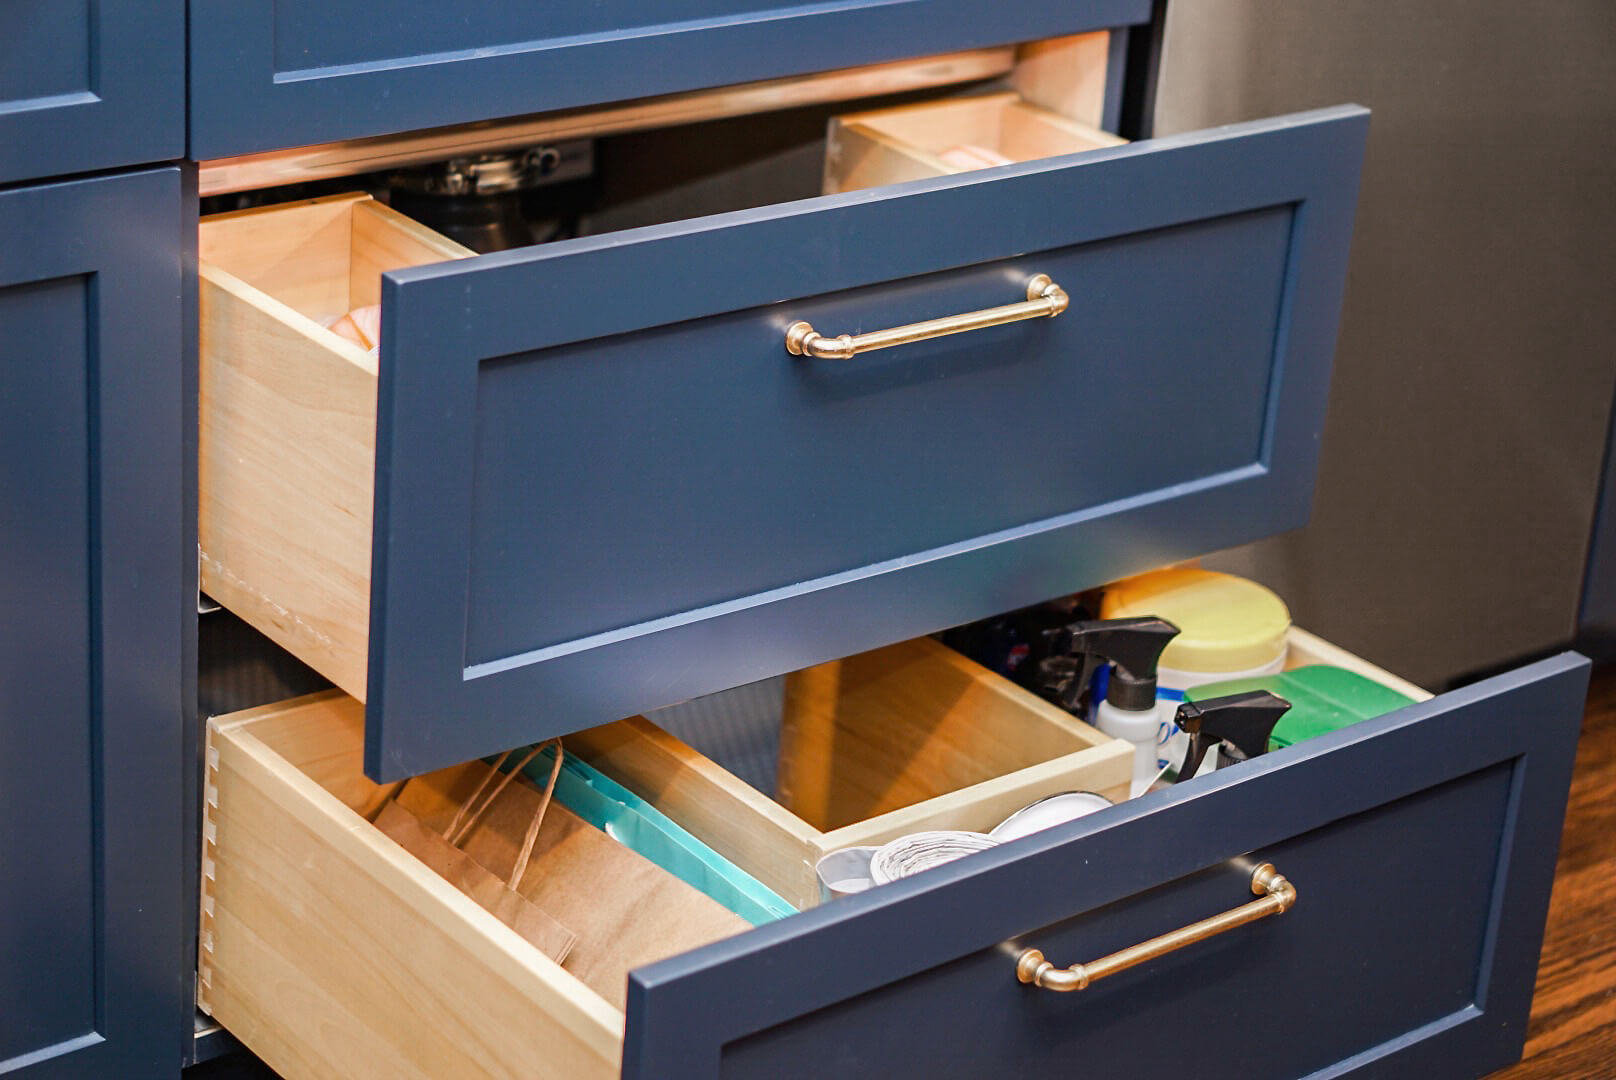 The custom sized plumbing drawers to fit around the garbage disposal and plumbing fixtures.